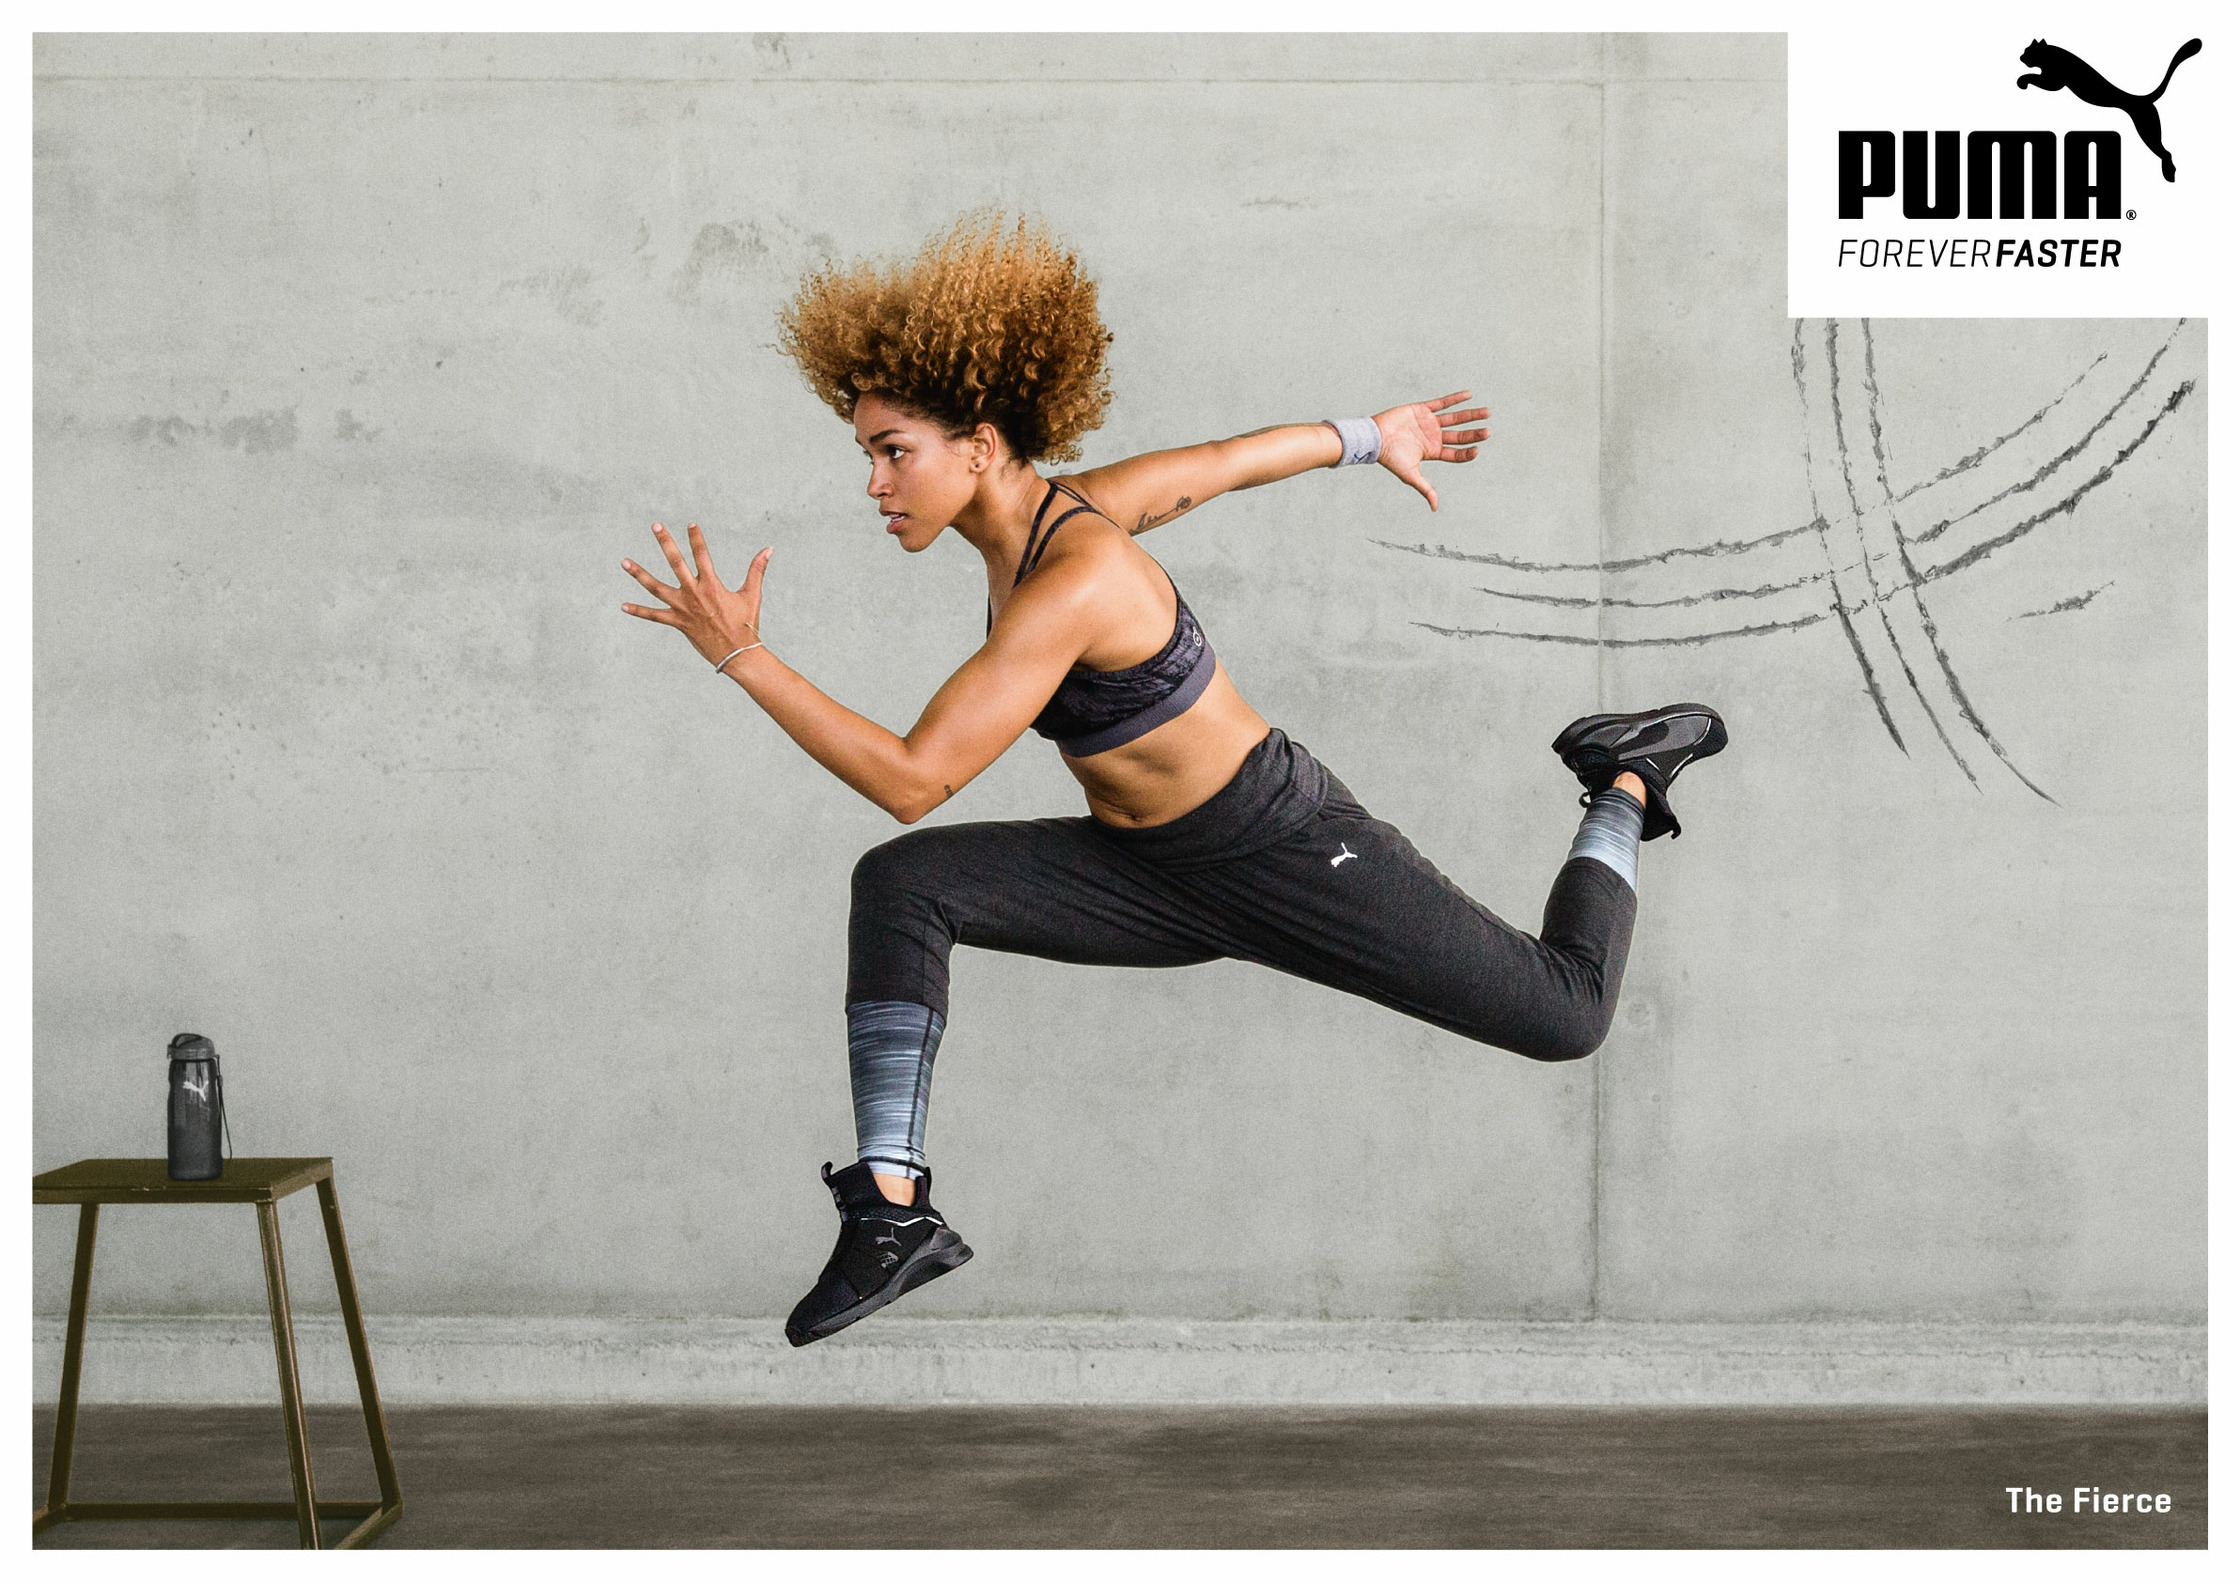 a woman is jumping in the air with a puma ad